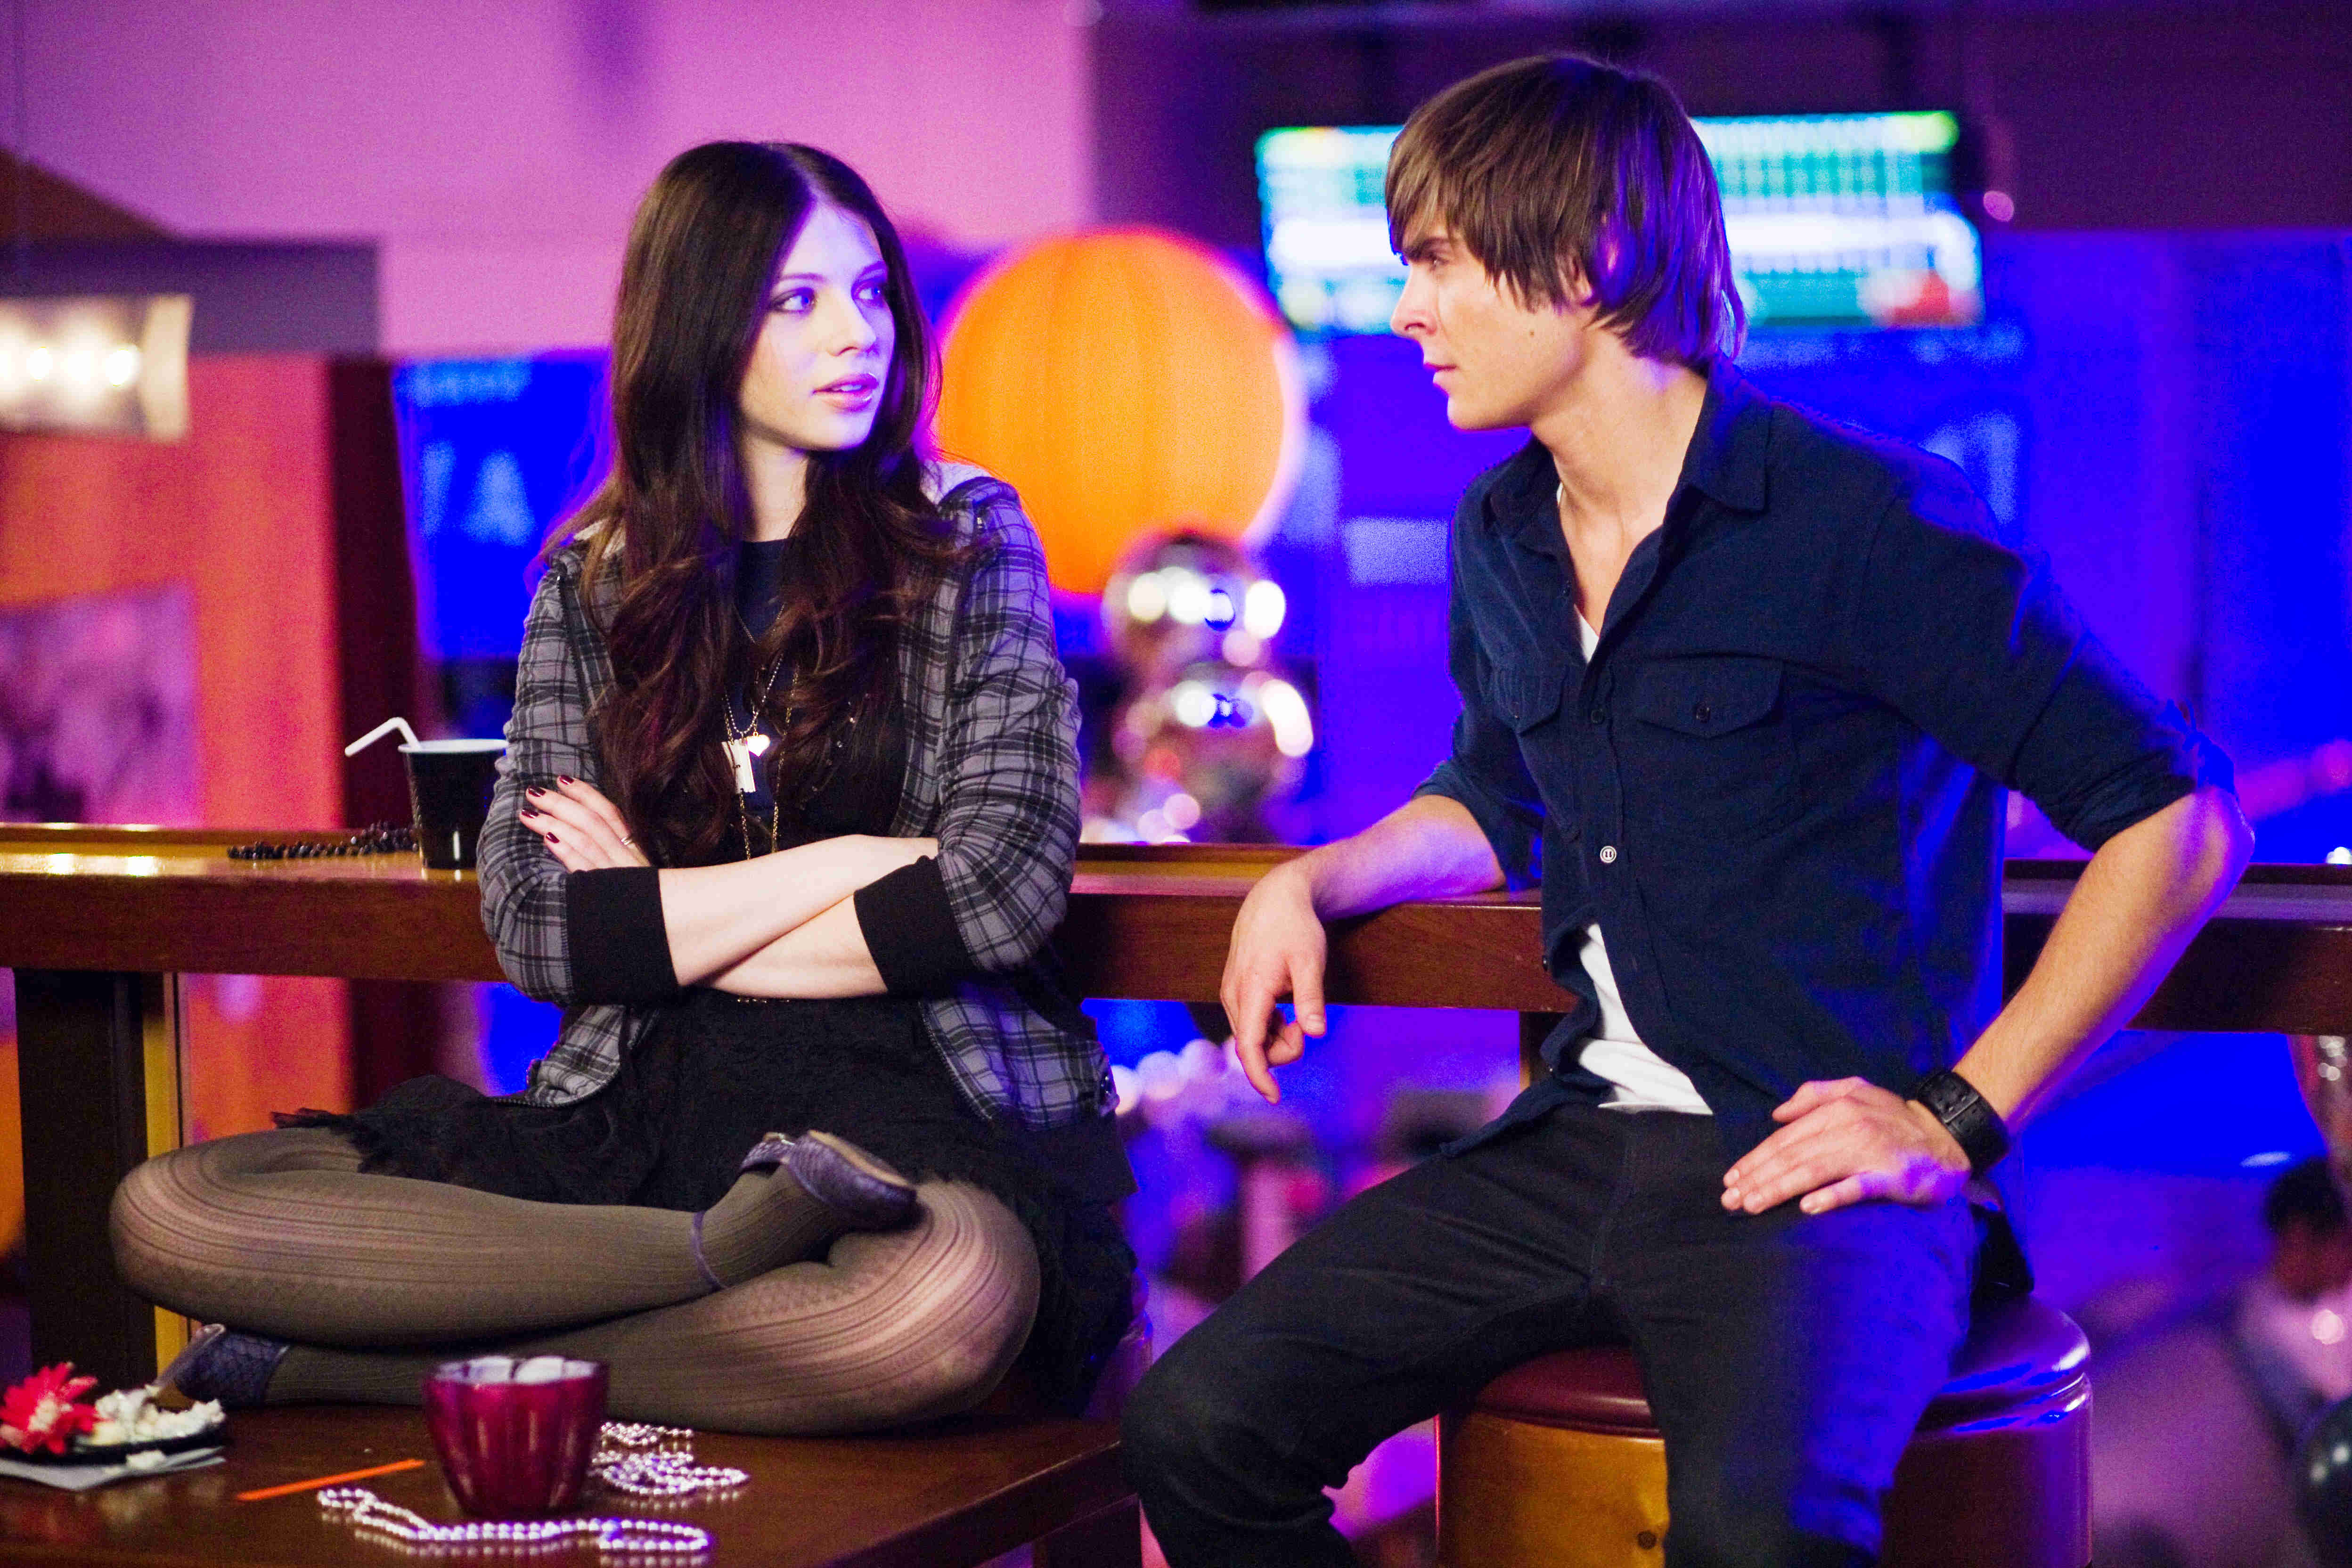 Michelle Trachtenberg stars as Maggie O'Donnell and Zac Efron stars as Mike O' Donnell at 17 in New Line Cinema's 17 Again (2009)